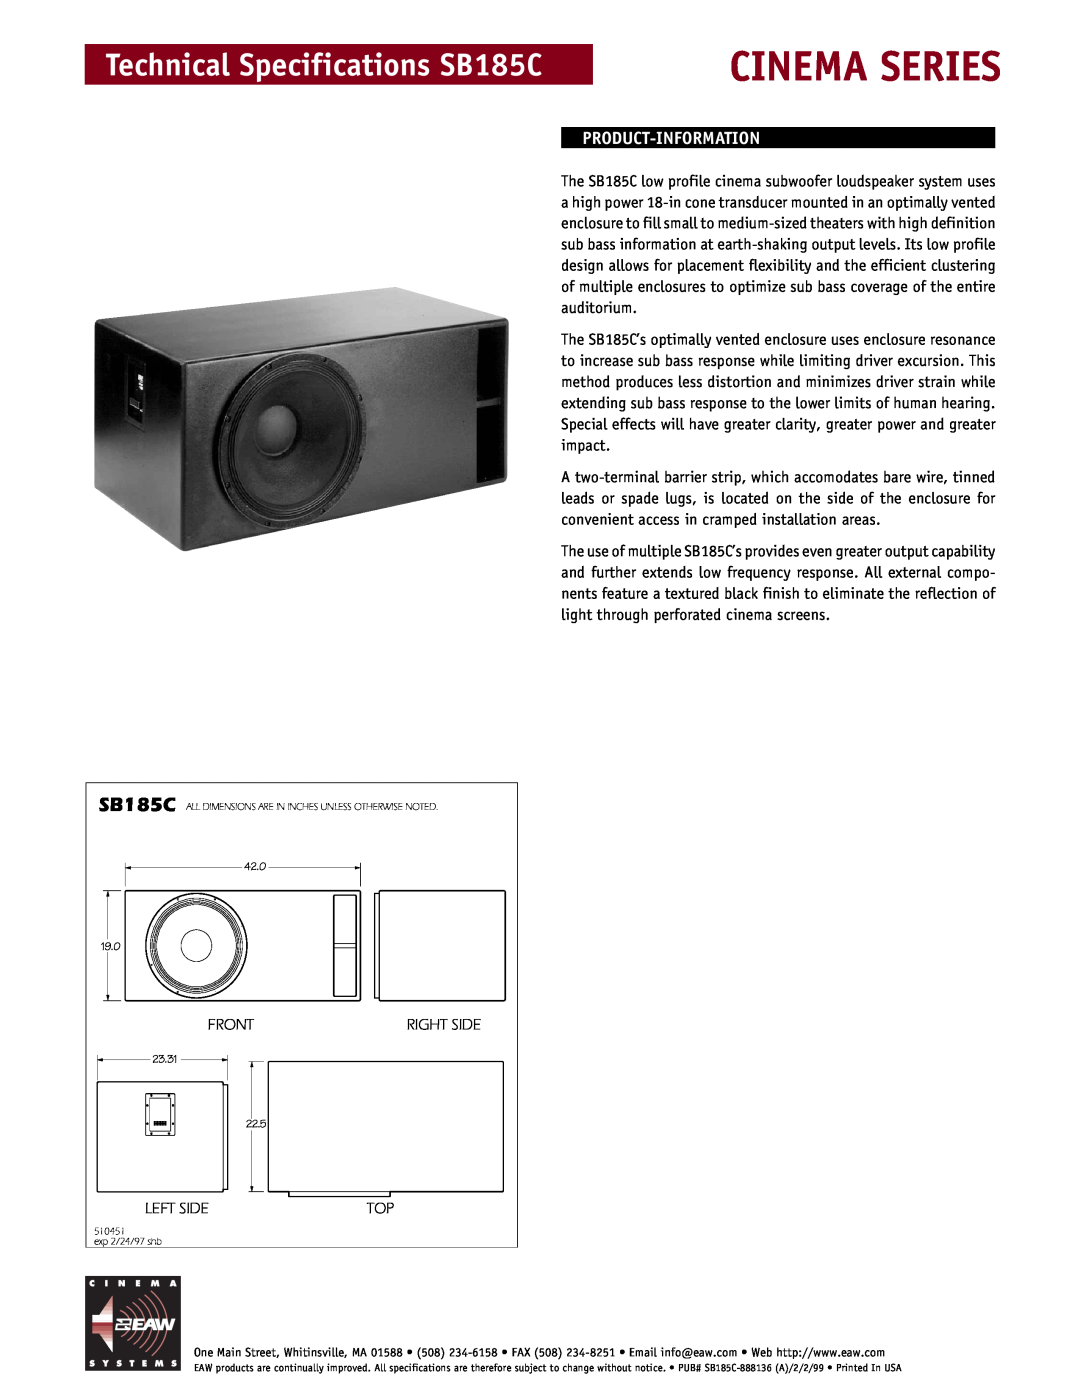 EAW technical specifications Cinema Series, Product-Information, Technical Specifications SB185C 